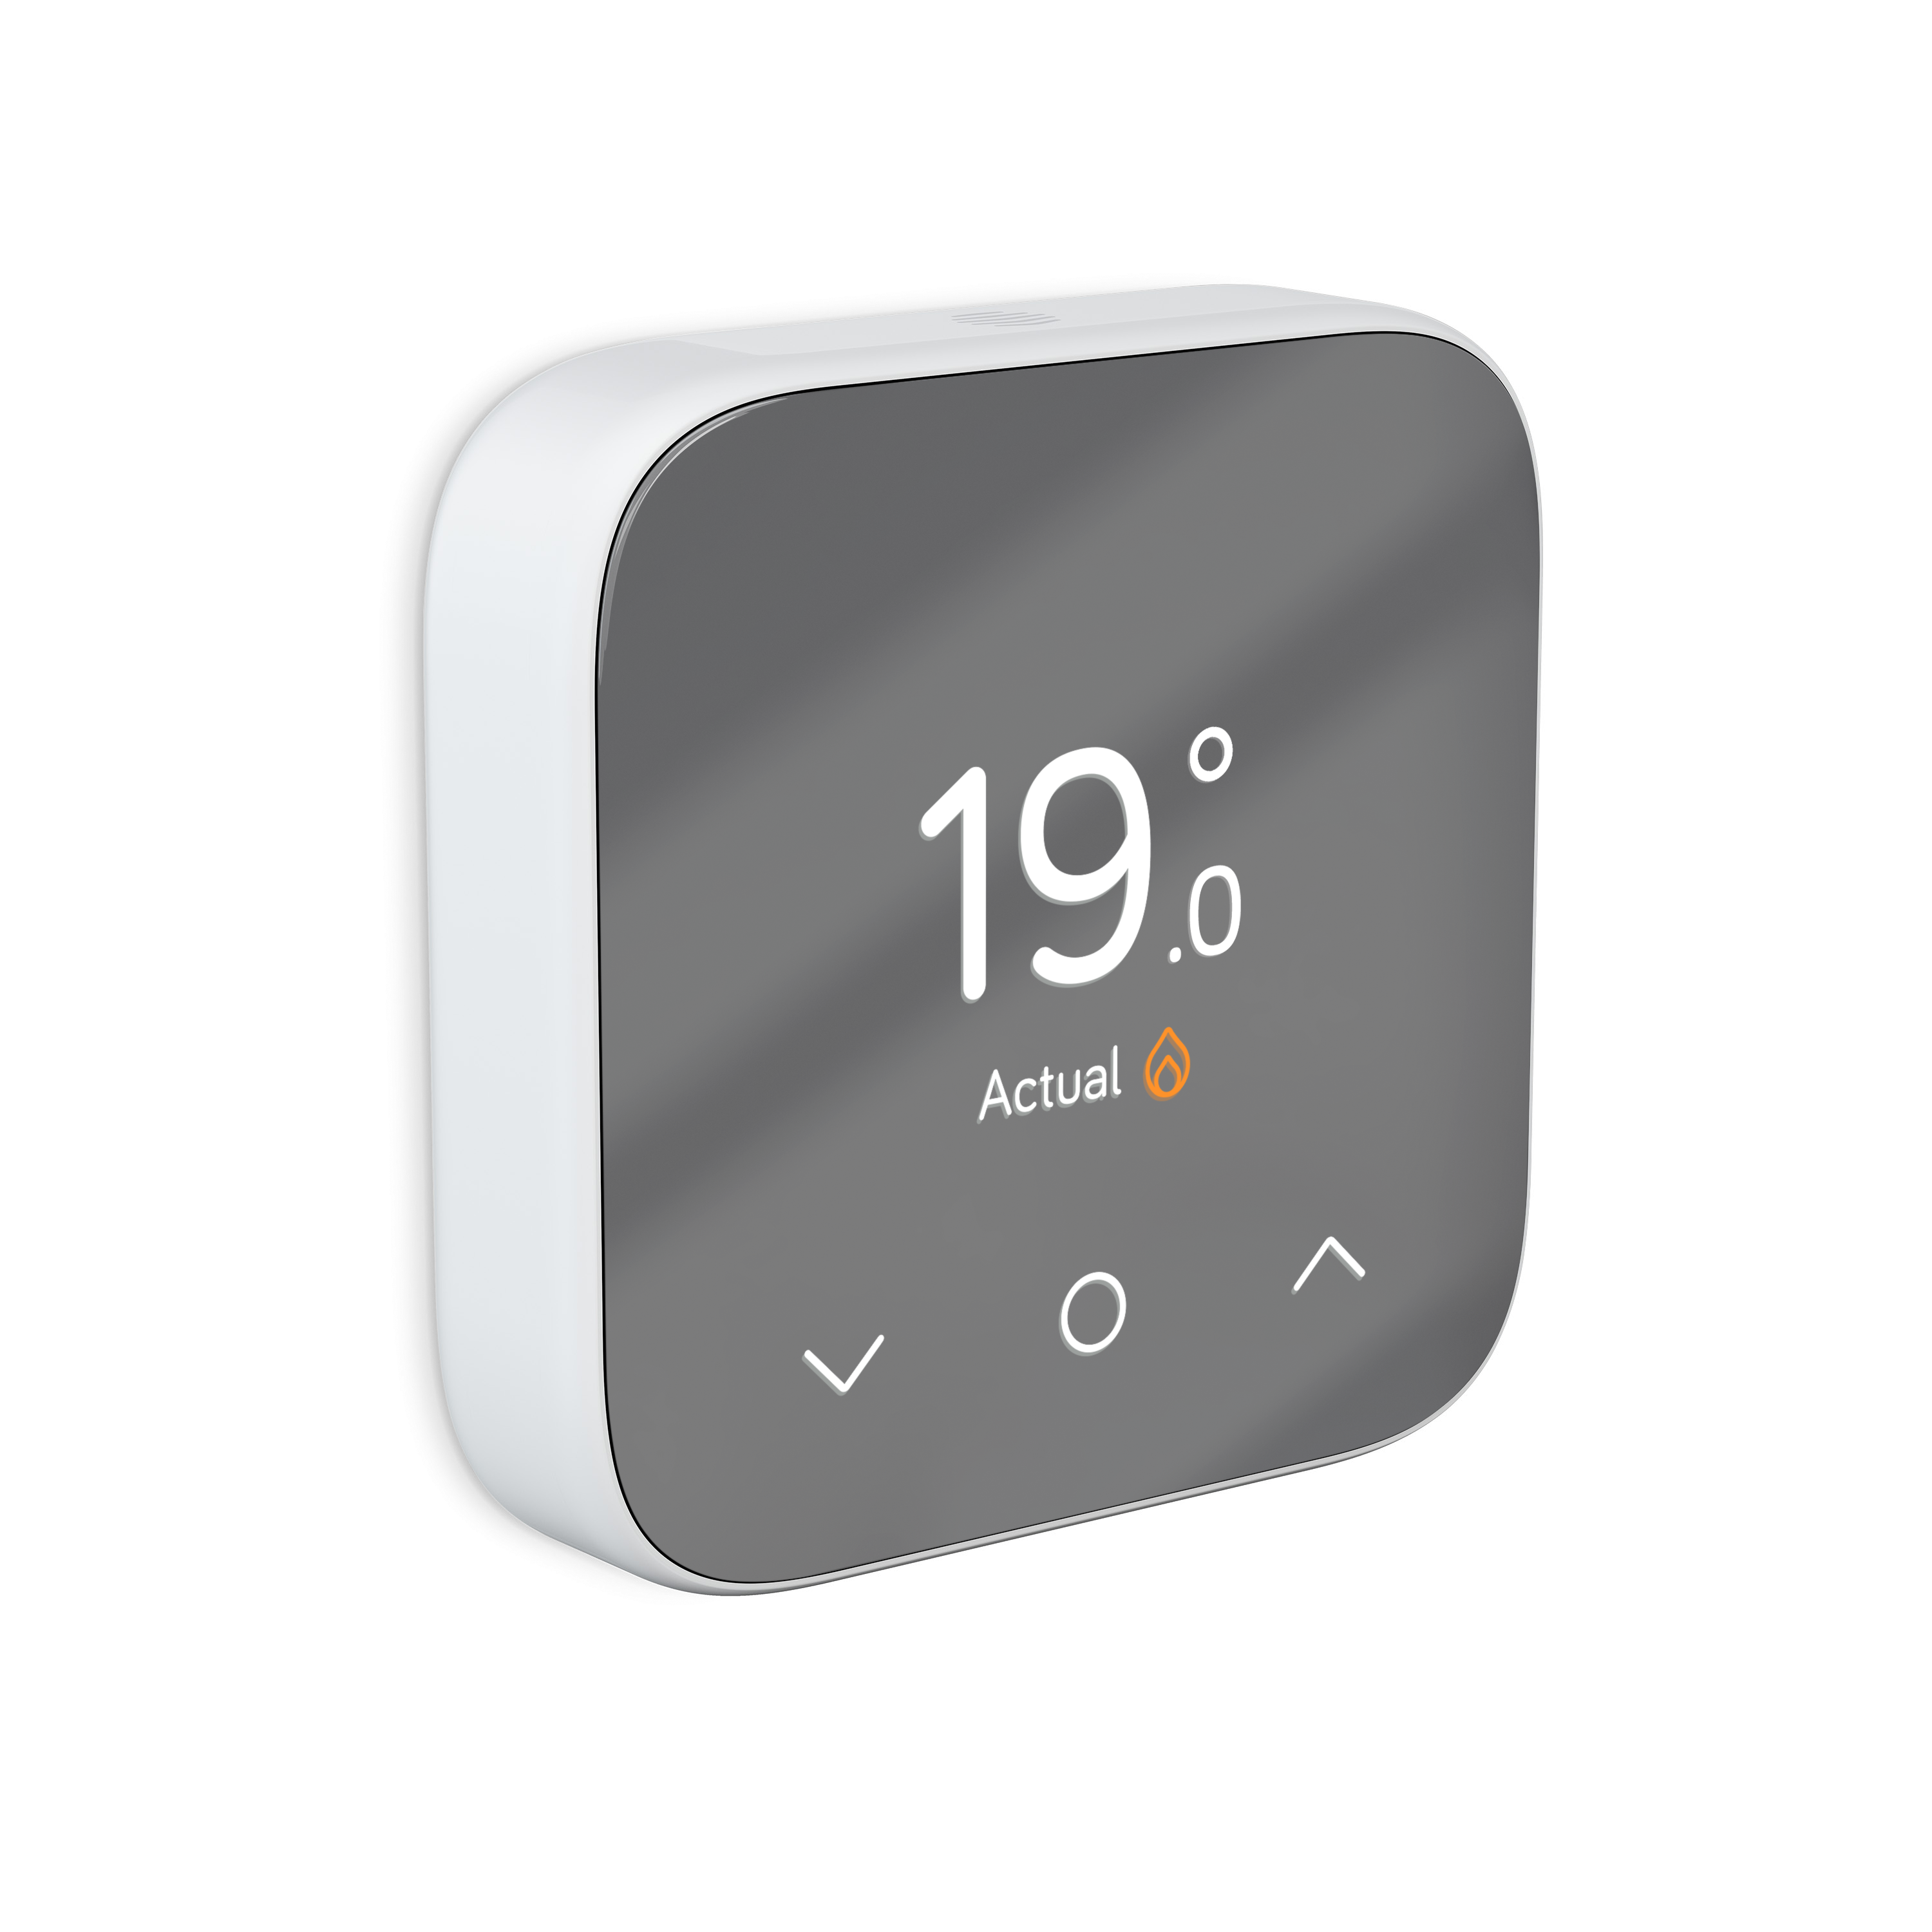 The Hive Thermostat Mini combines cutting edge technology with award-winning design